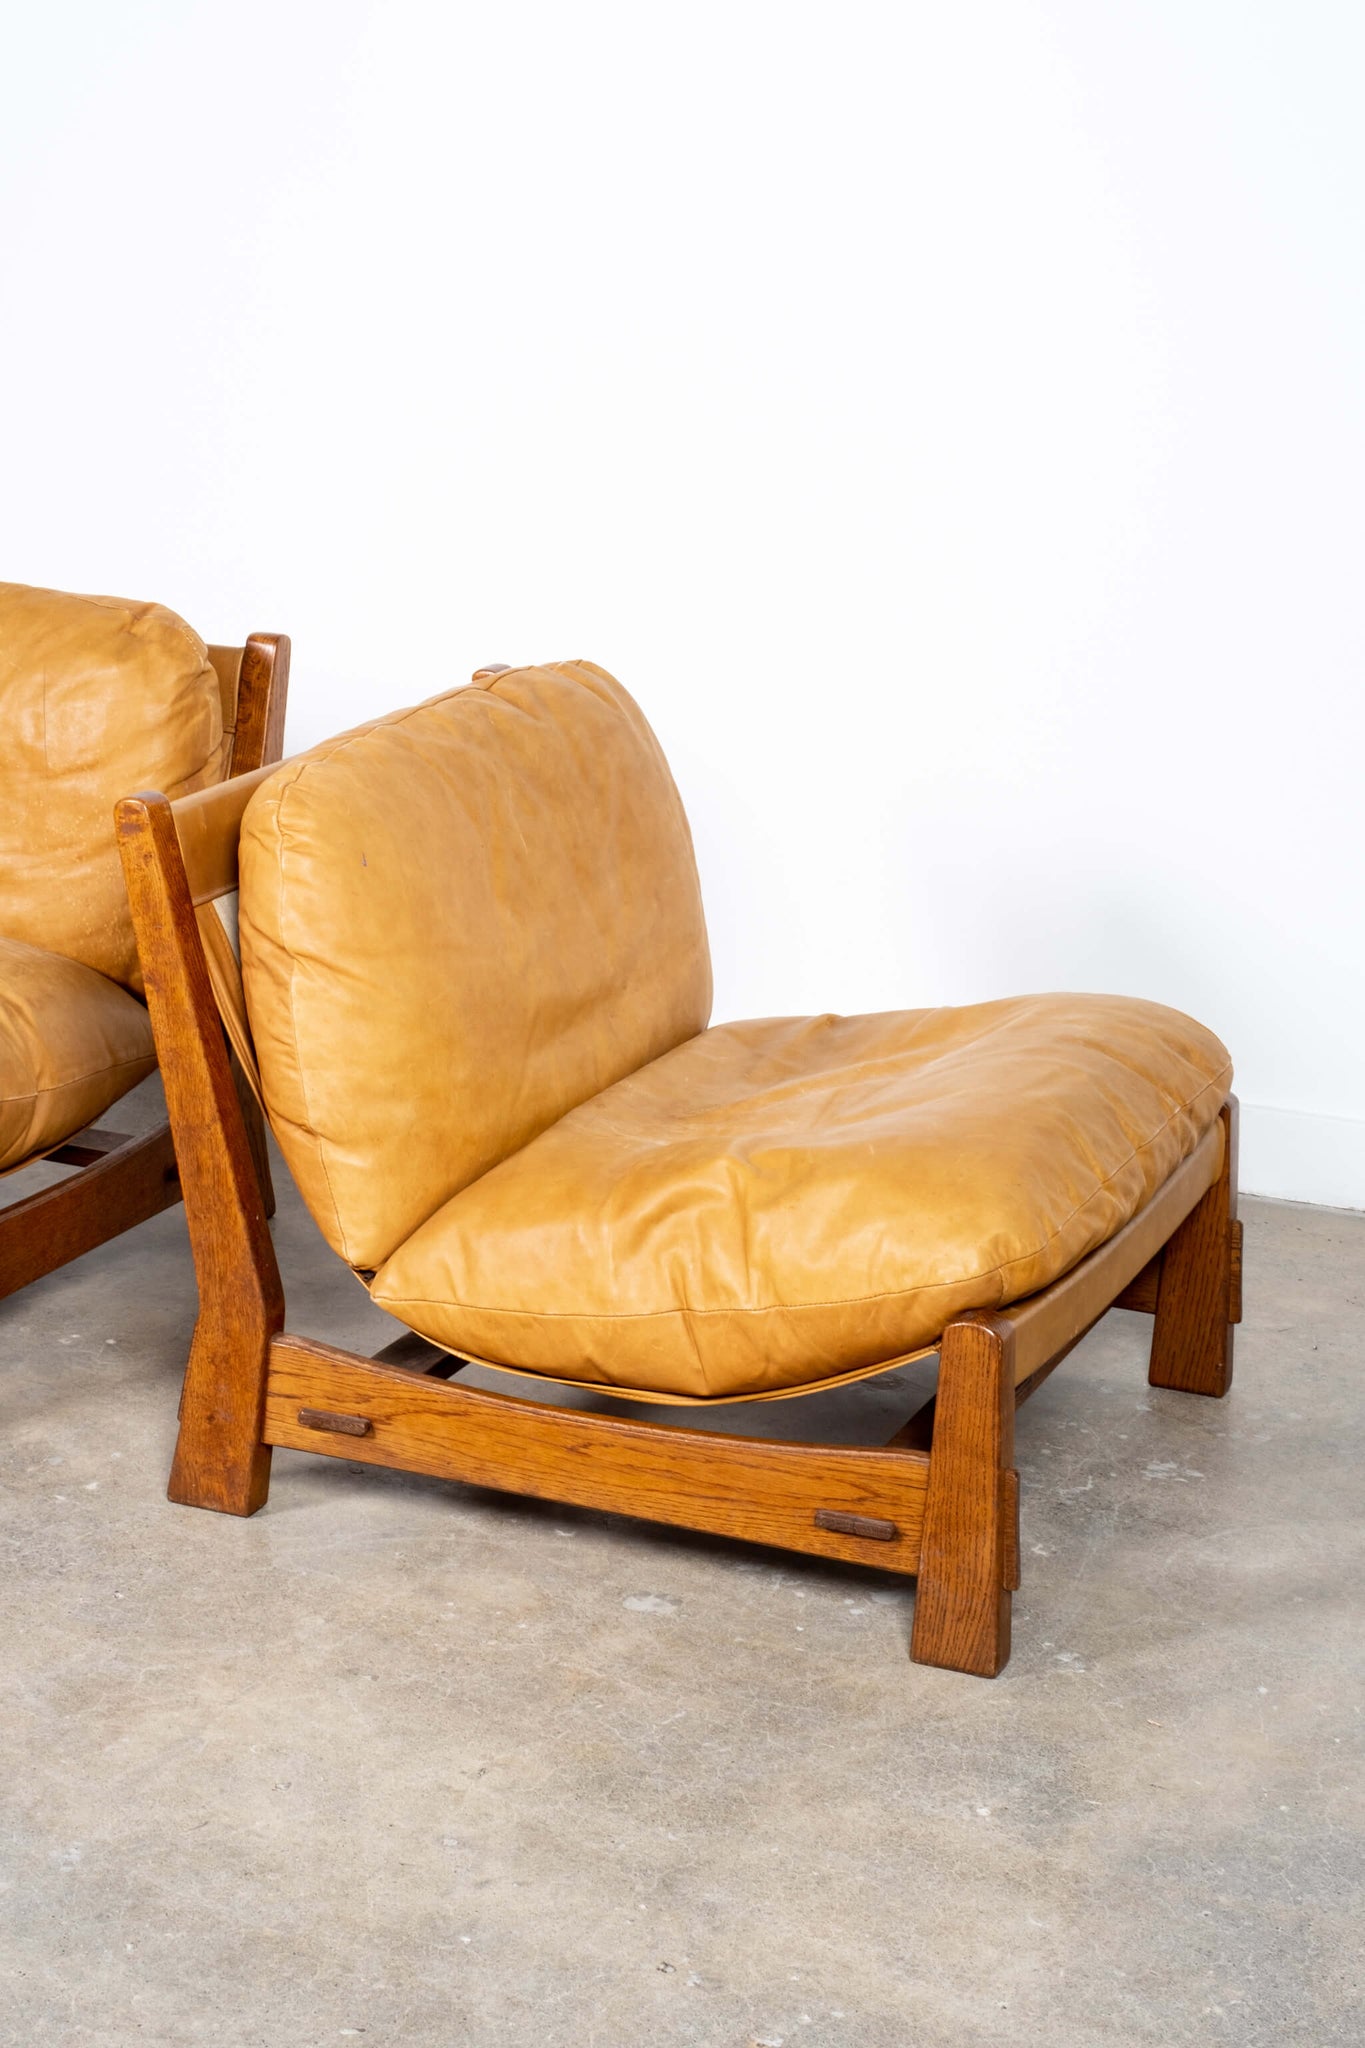 Pair of Vintage Leather Sling Chairs with Oak Frame, seat detail